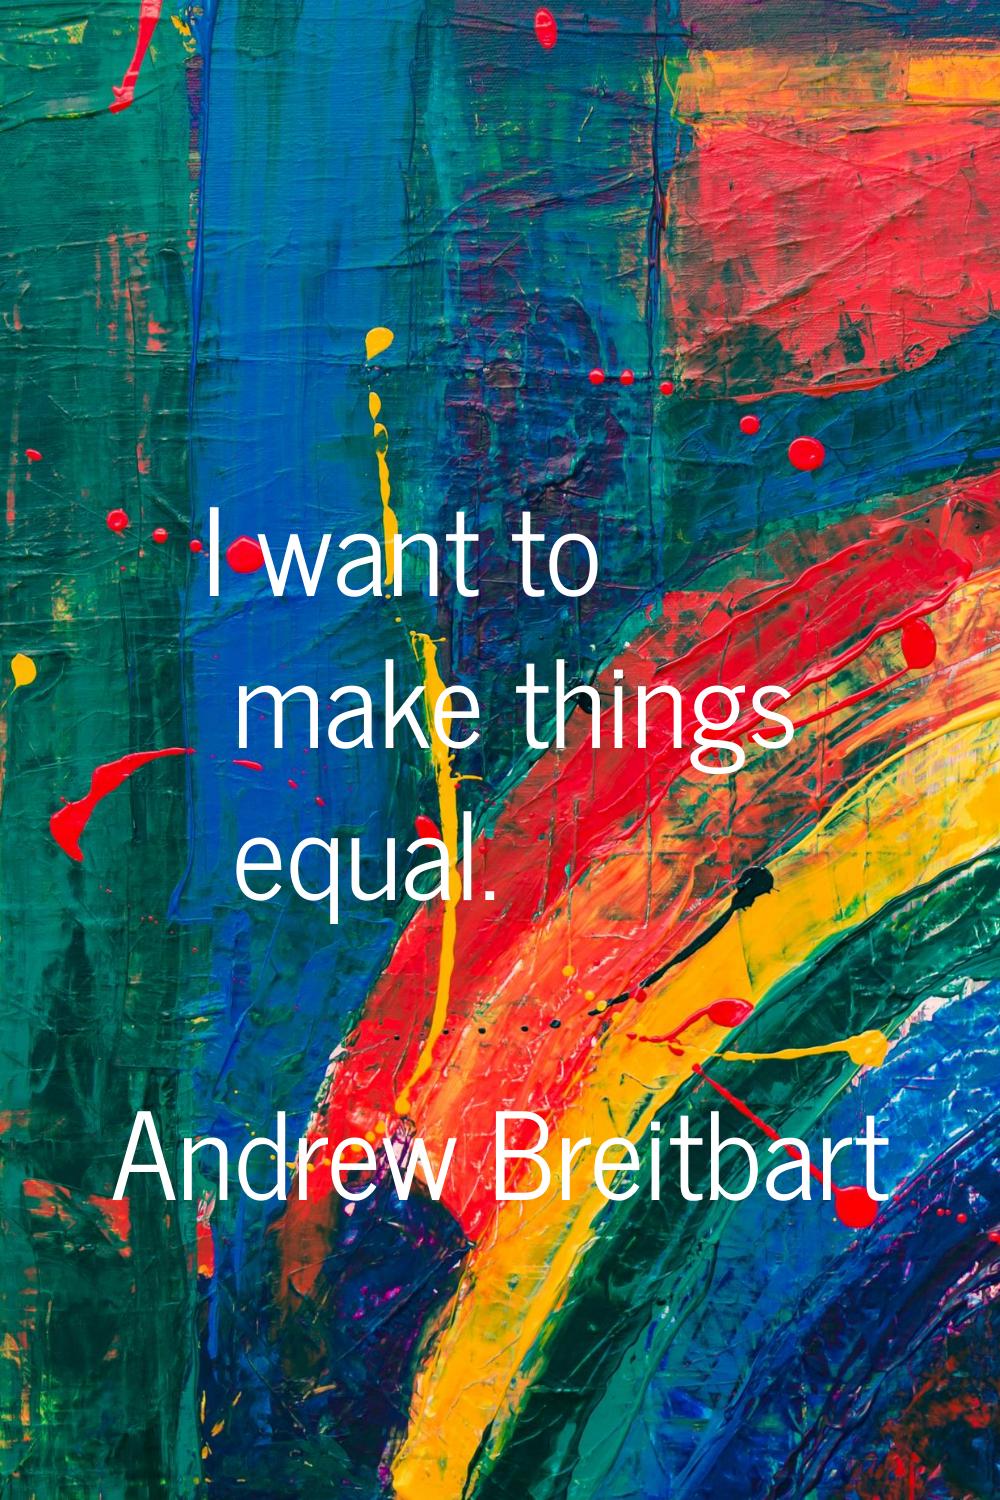 I want to make things equal.